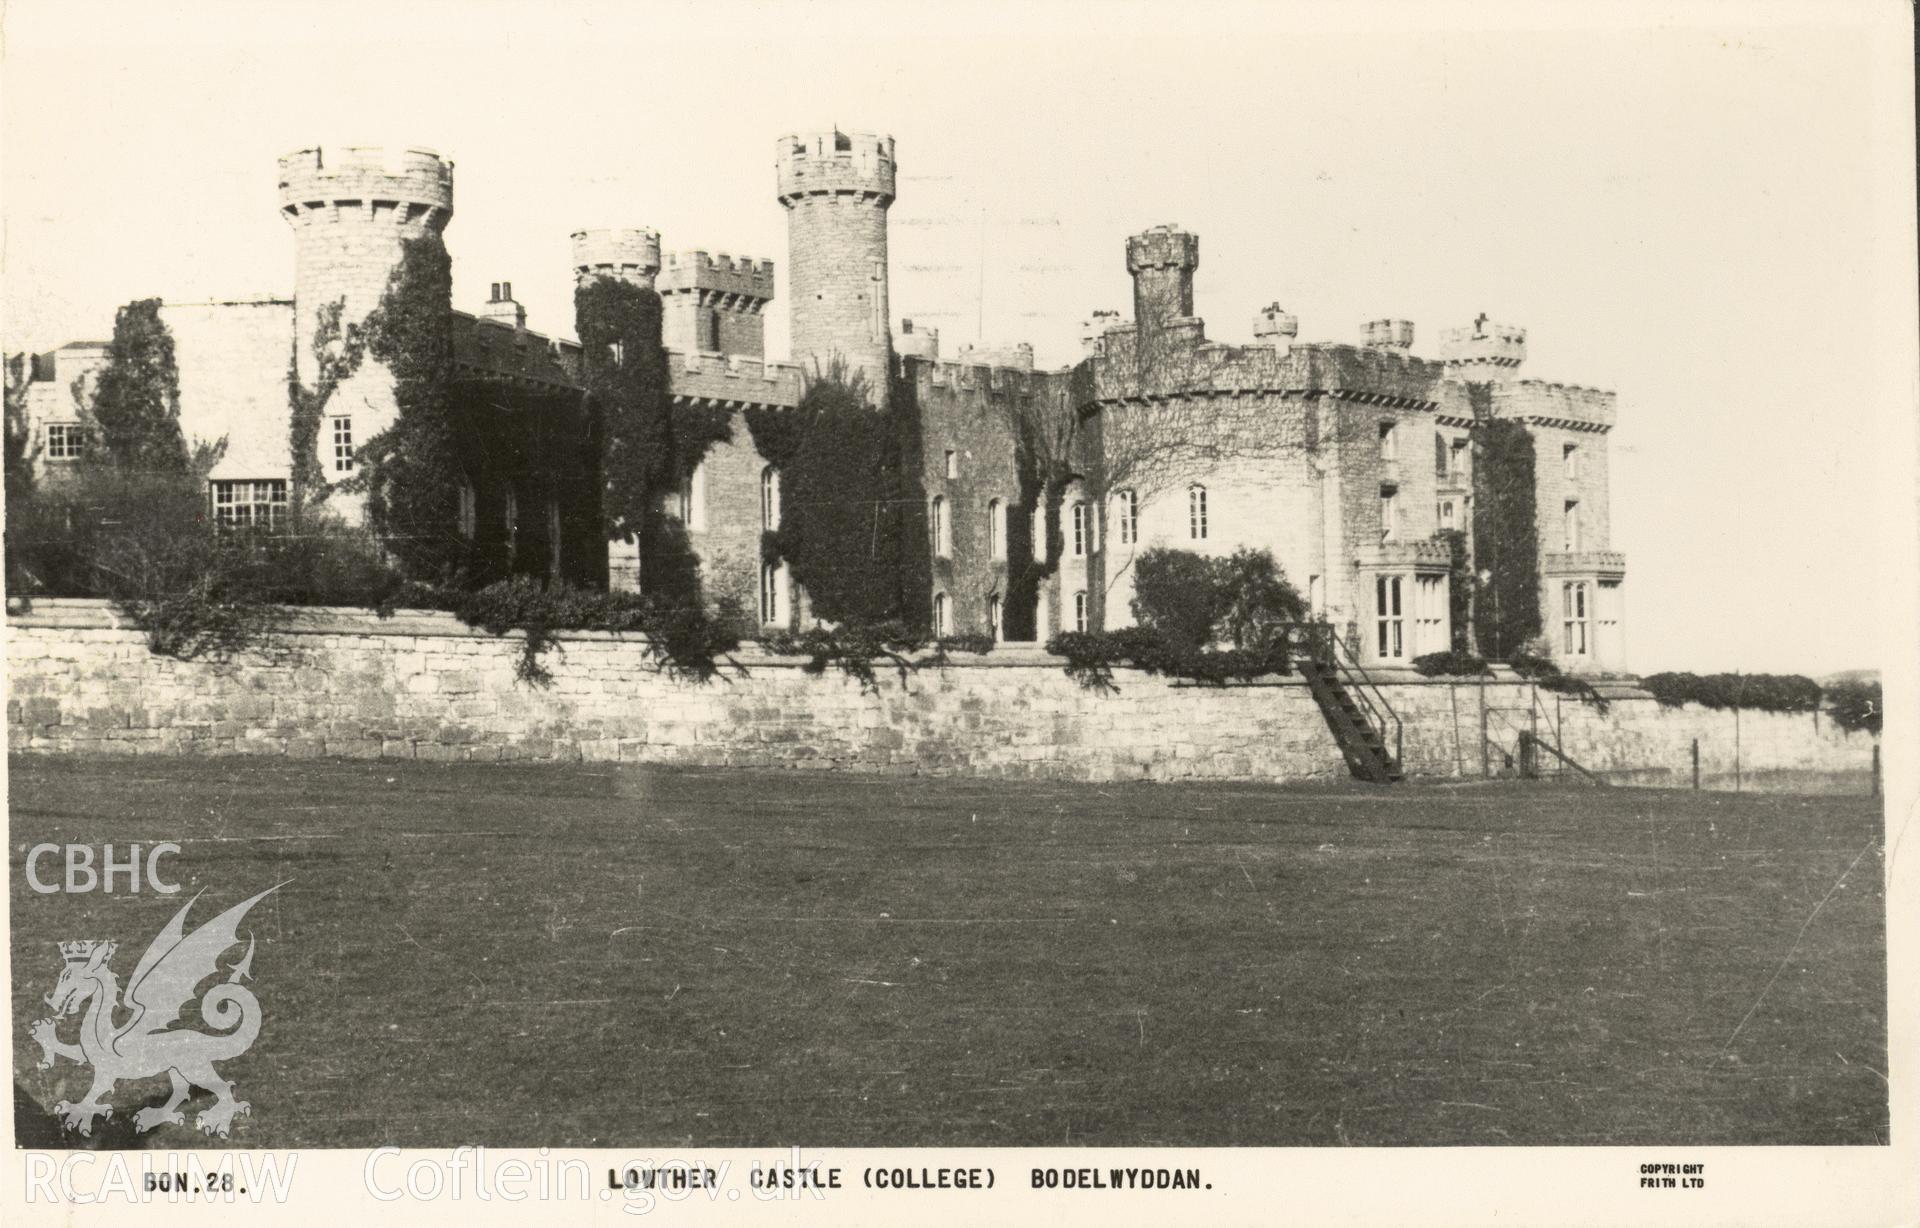 Digitised postcard image of Bodelwyddan Castle / Lowther College, Frith Series. Produced by Parks and Gardens Data Services, from an original item in the Peter Davis Collection at Parks and Gardens UK. We hold only web-resolution images of this collection, suitable for viewing on screen and for research purposes only. We do not hold the original images, or publication quality scans.